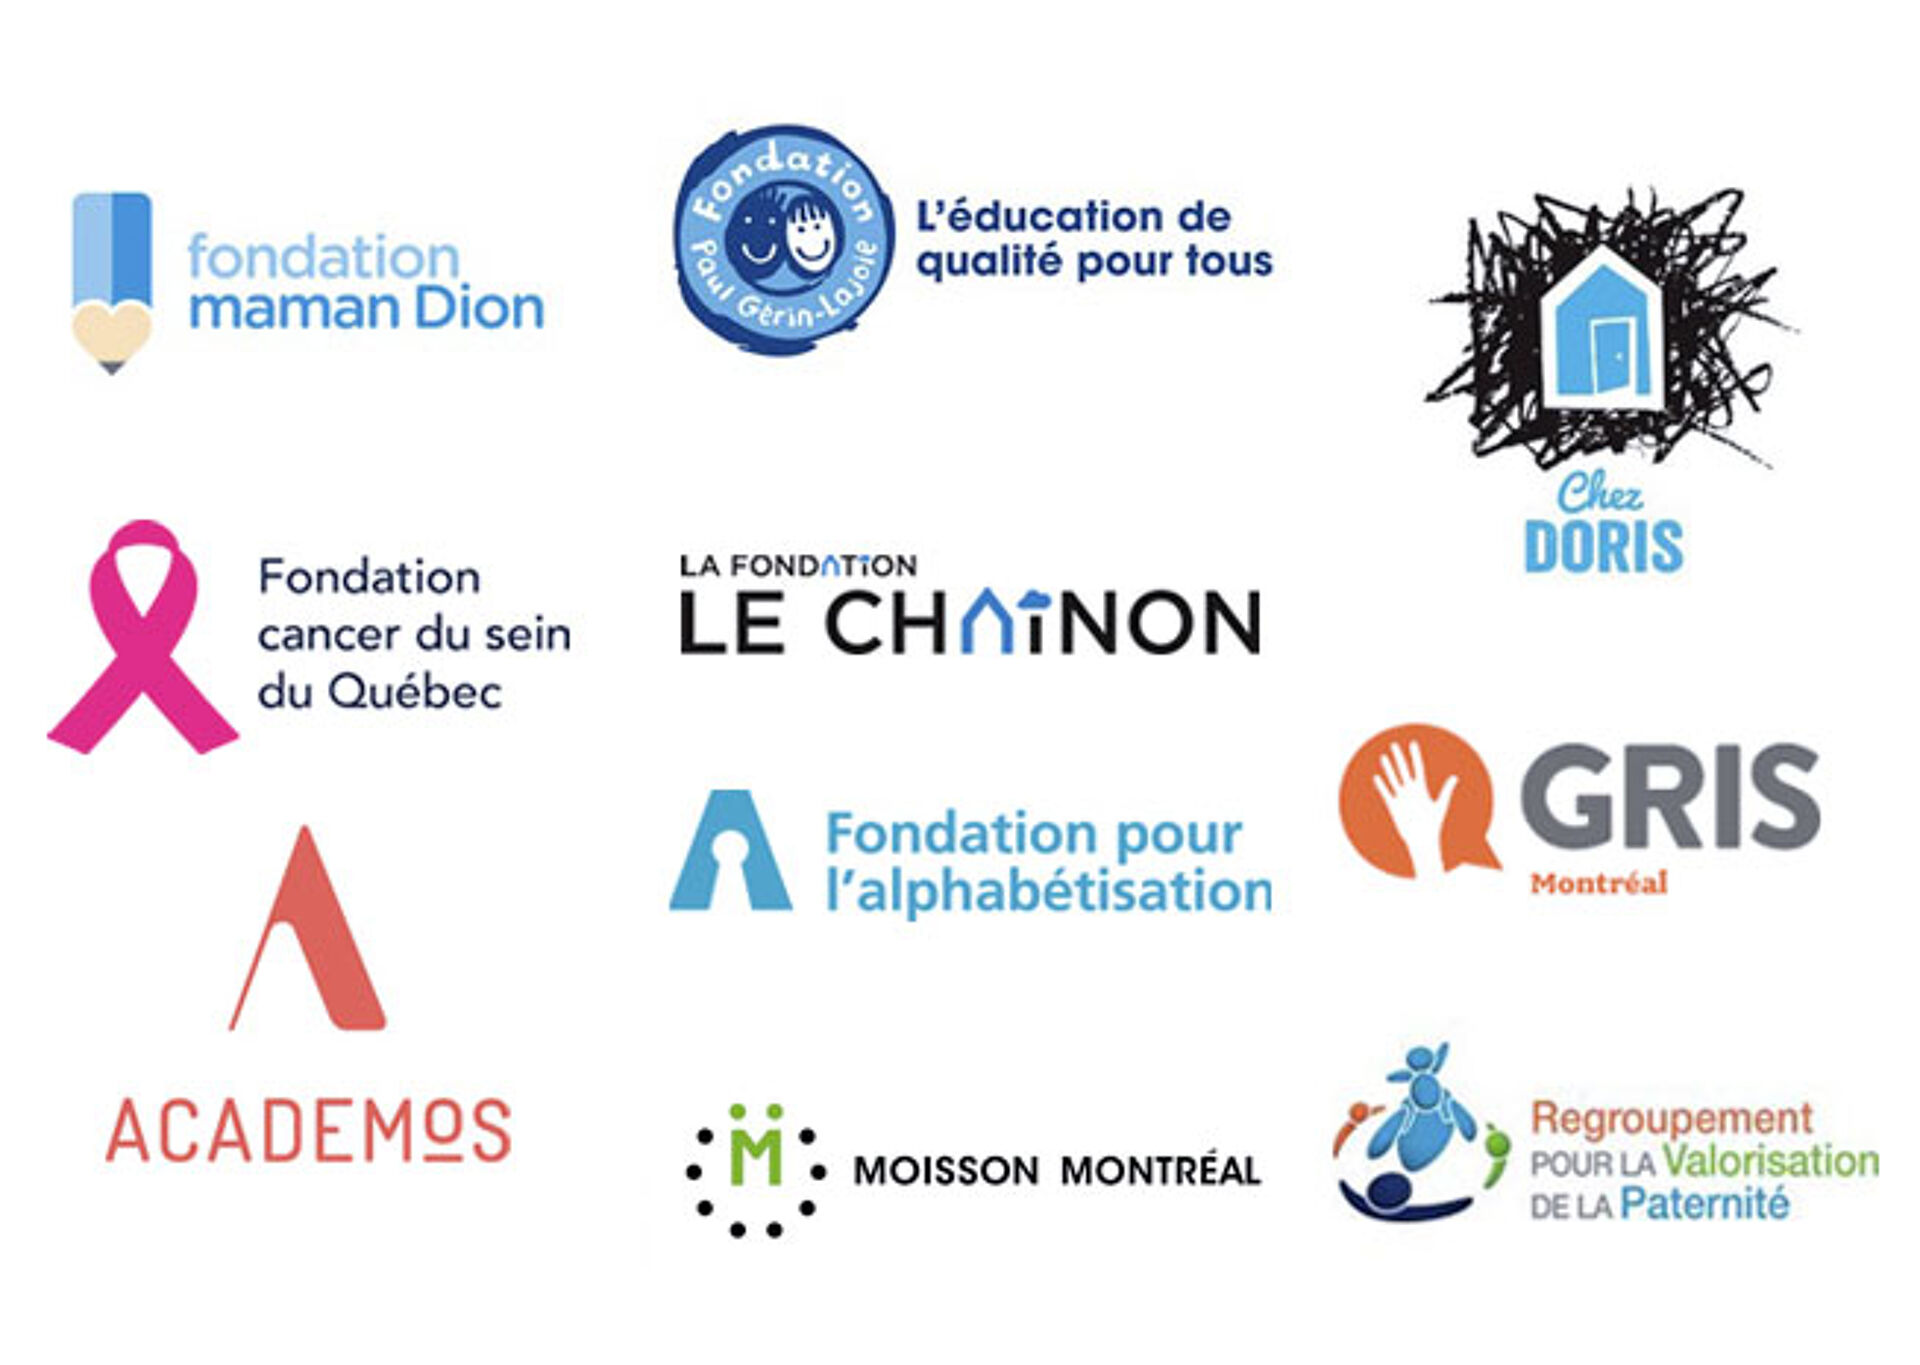 A collage showcasing various logos of Canadian non-profit organizations, including those focusing on education, health, food security, and family support.